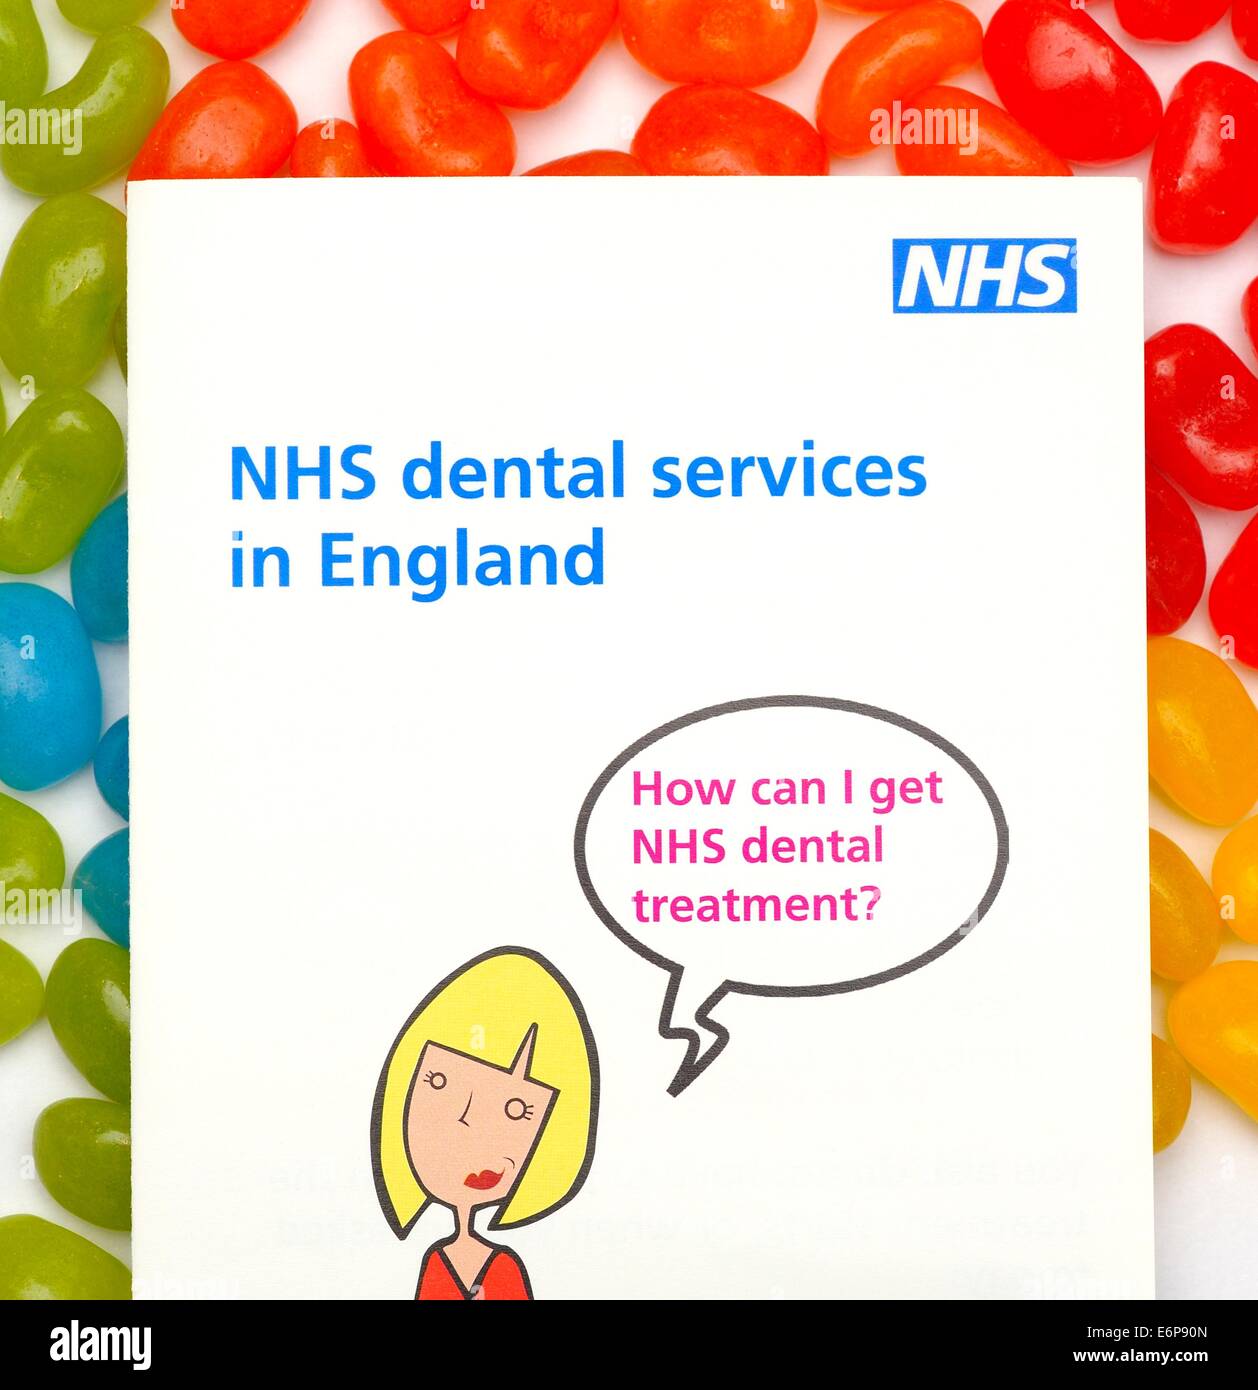 NHS dental services in England uk Stock Photo